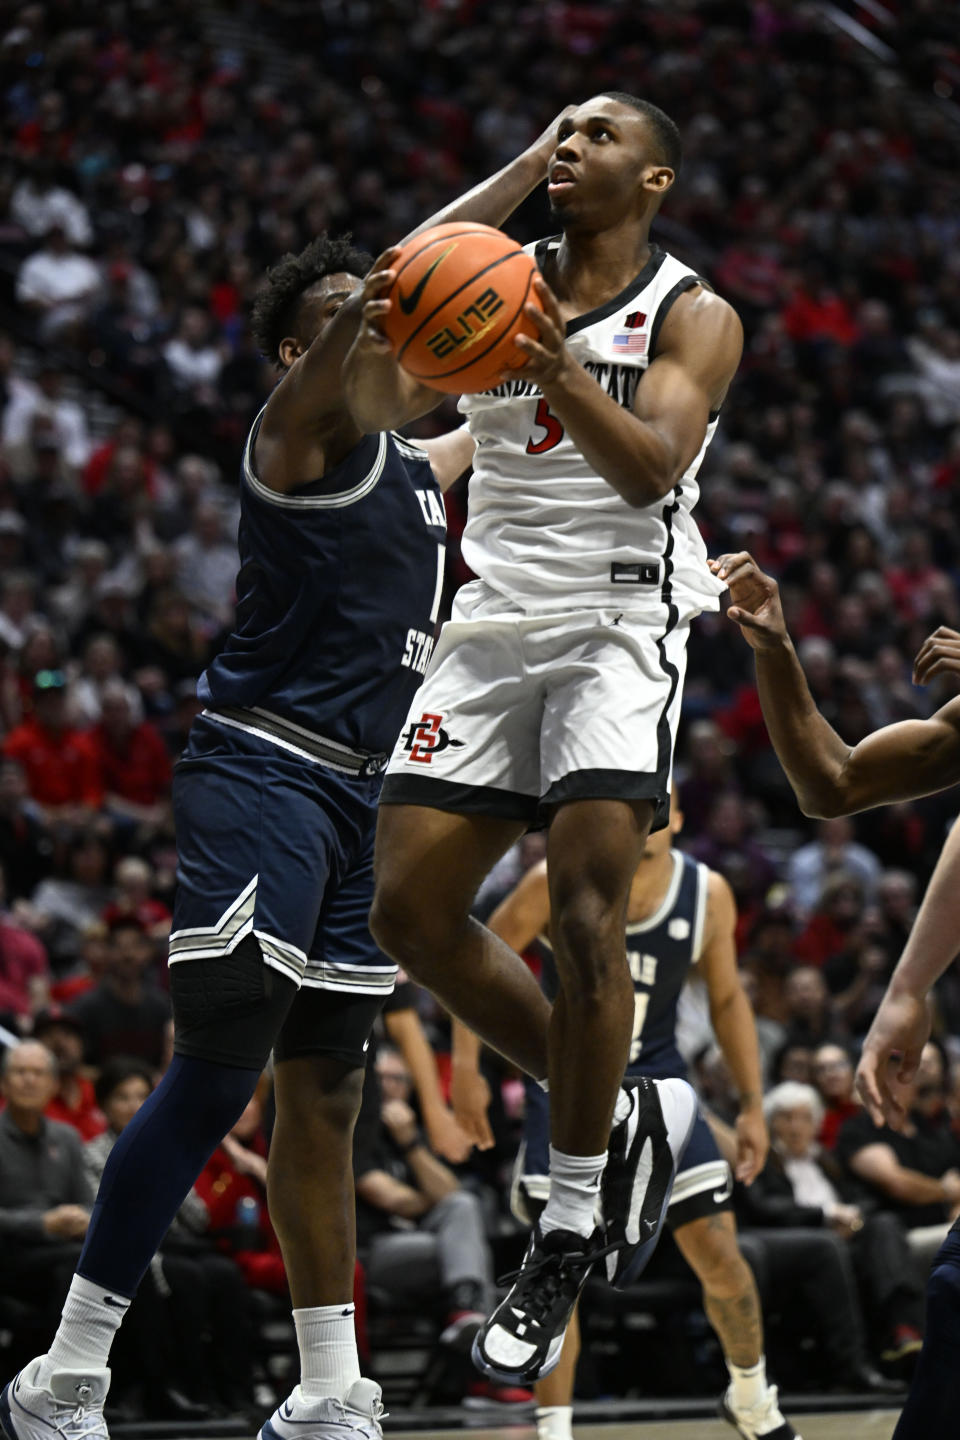 San Diego State guard Lamont Butler (5) goes up to shoot past Utah State forward Great Osobor (1) during the first half of an NCAA college basketball game Saturday, Feb. 3, 2024, in San Diego. (AP Photo/Denis Poroy)